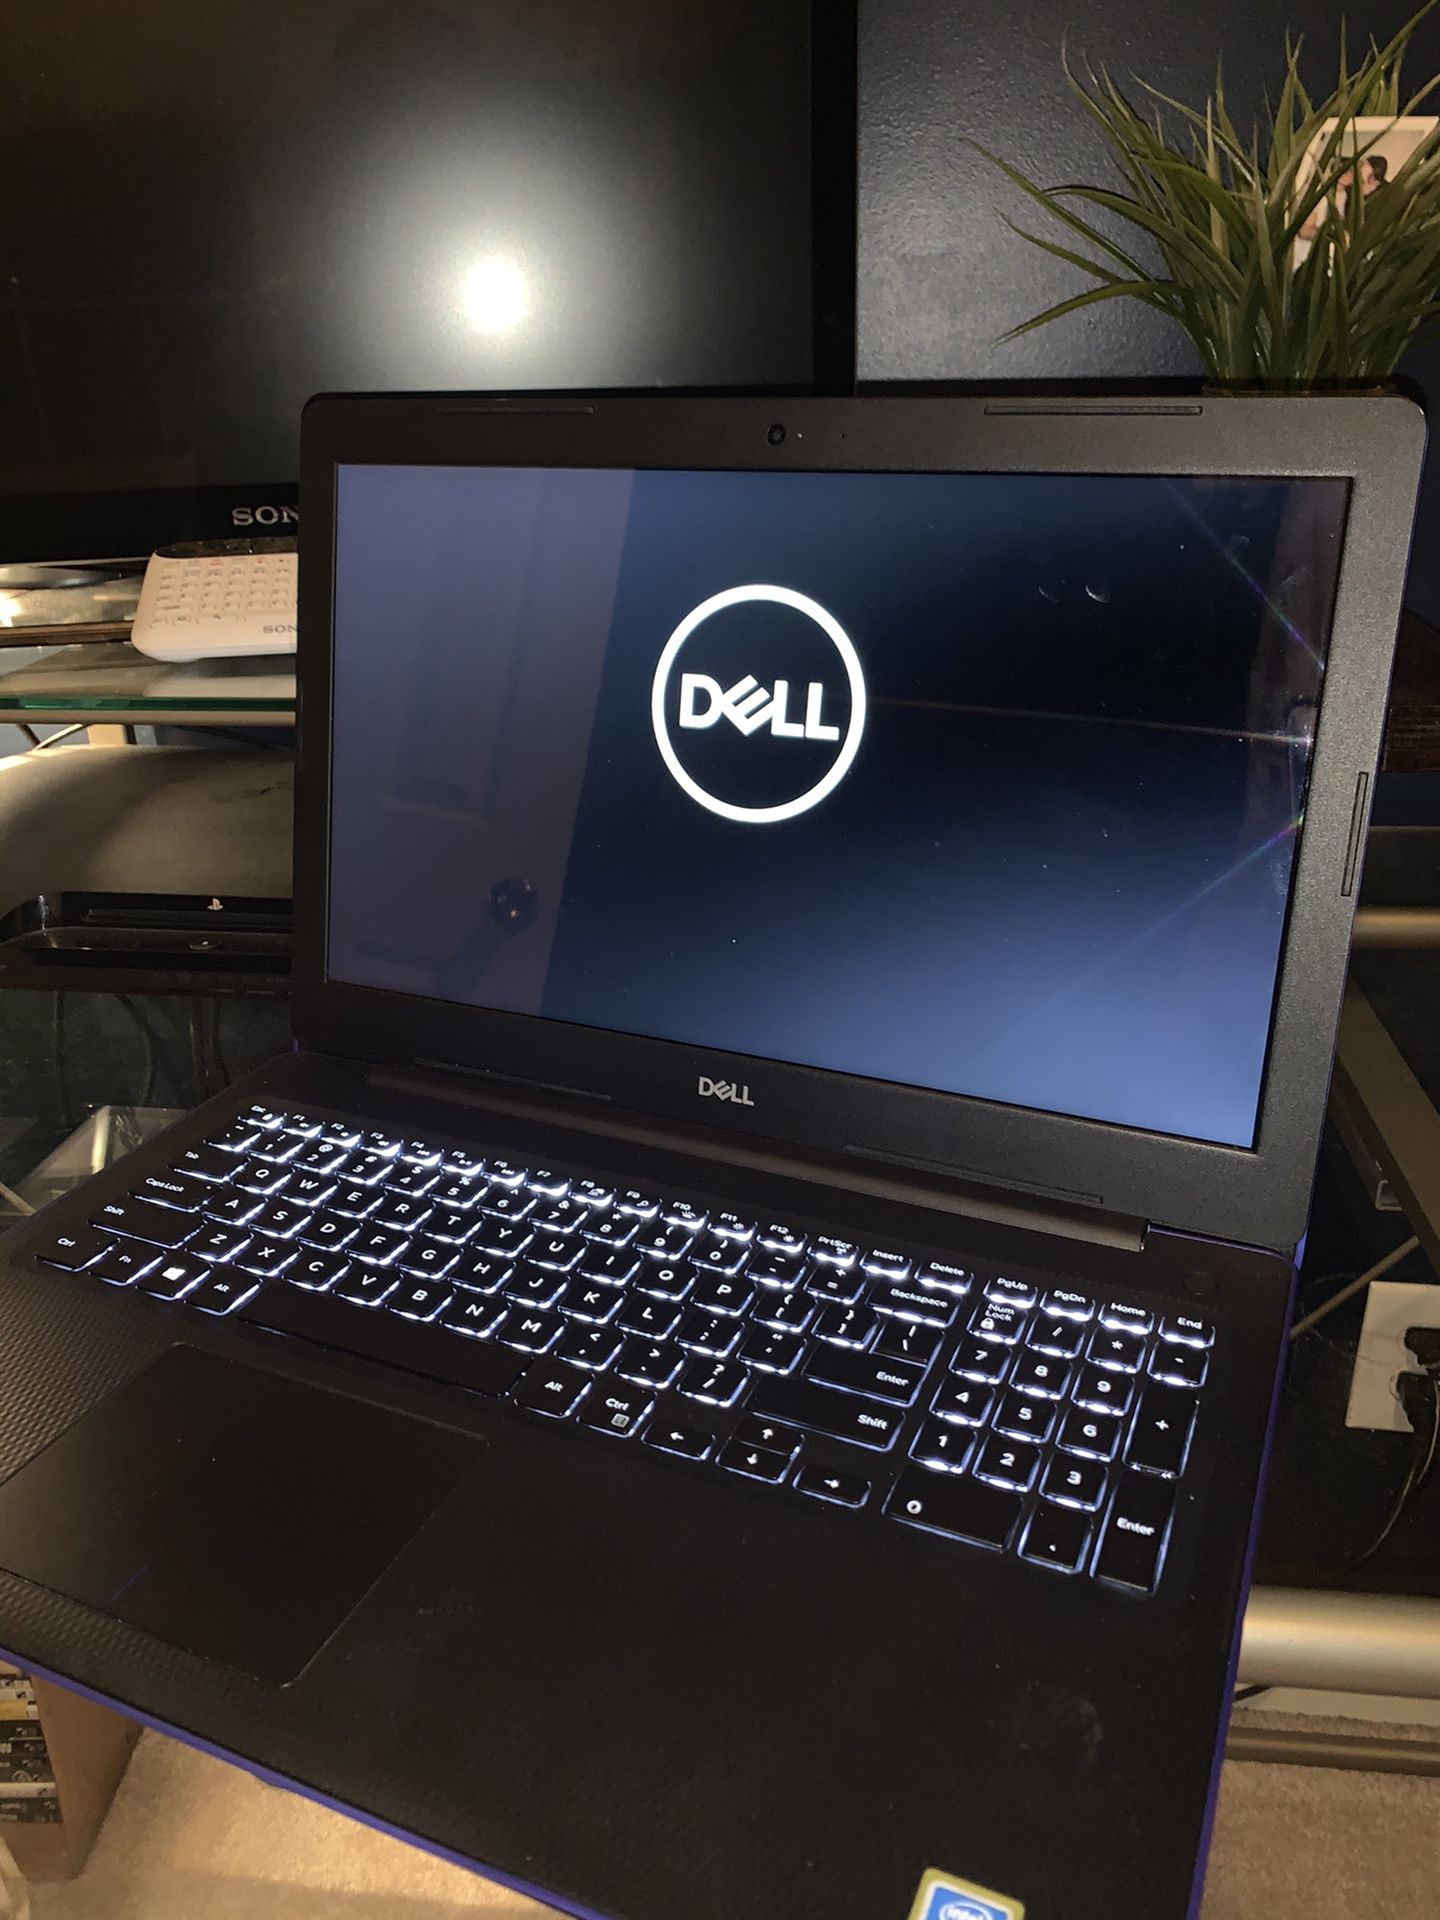 Dell Inspiron 15 (Like New)